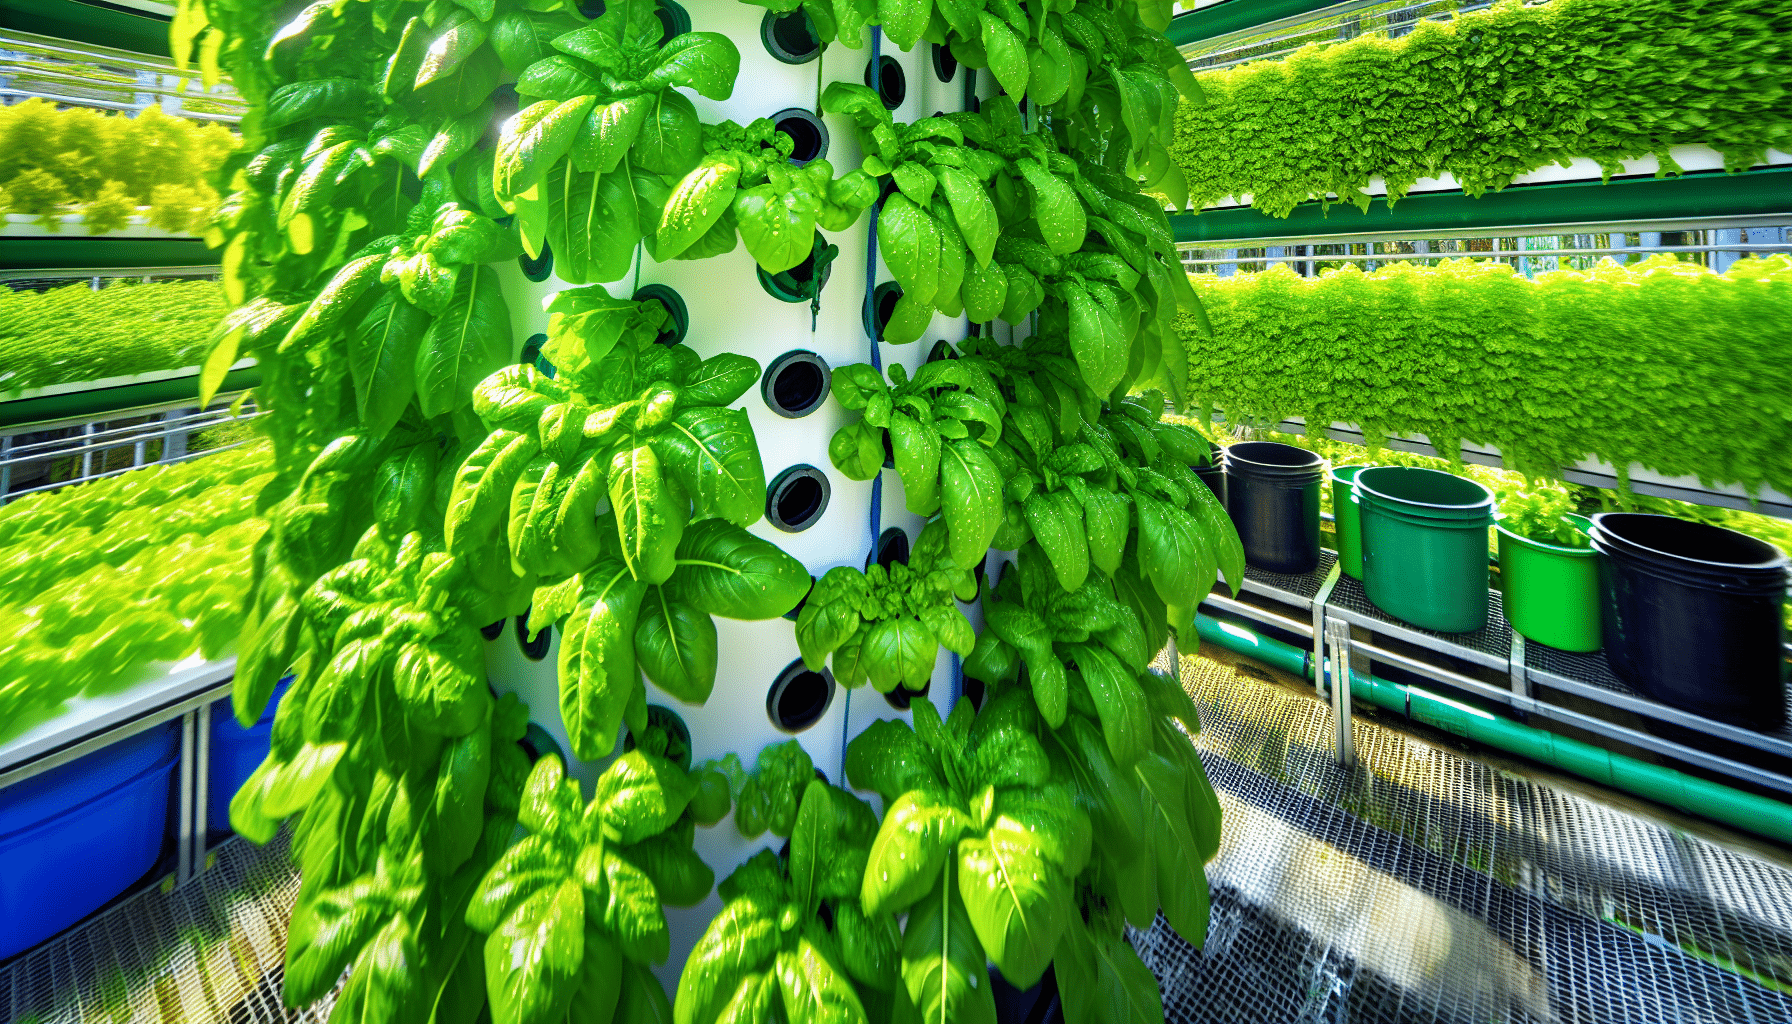 Sustainable hydroponics tower garden conserving water and promoting eco-friendly food production